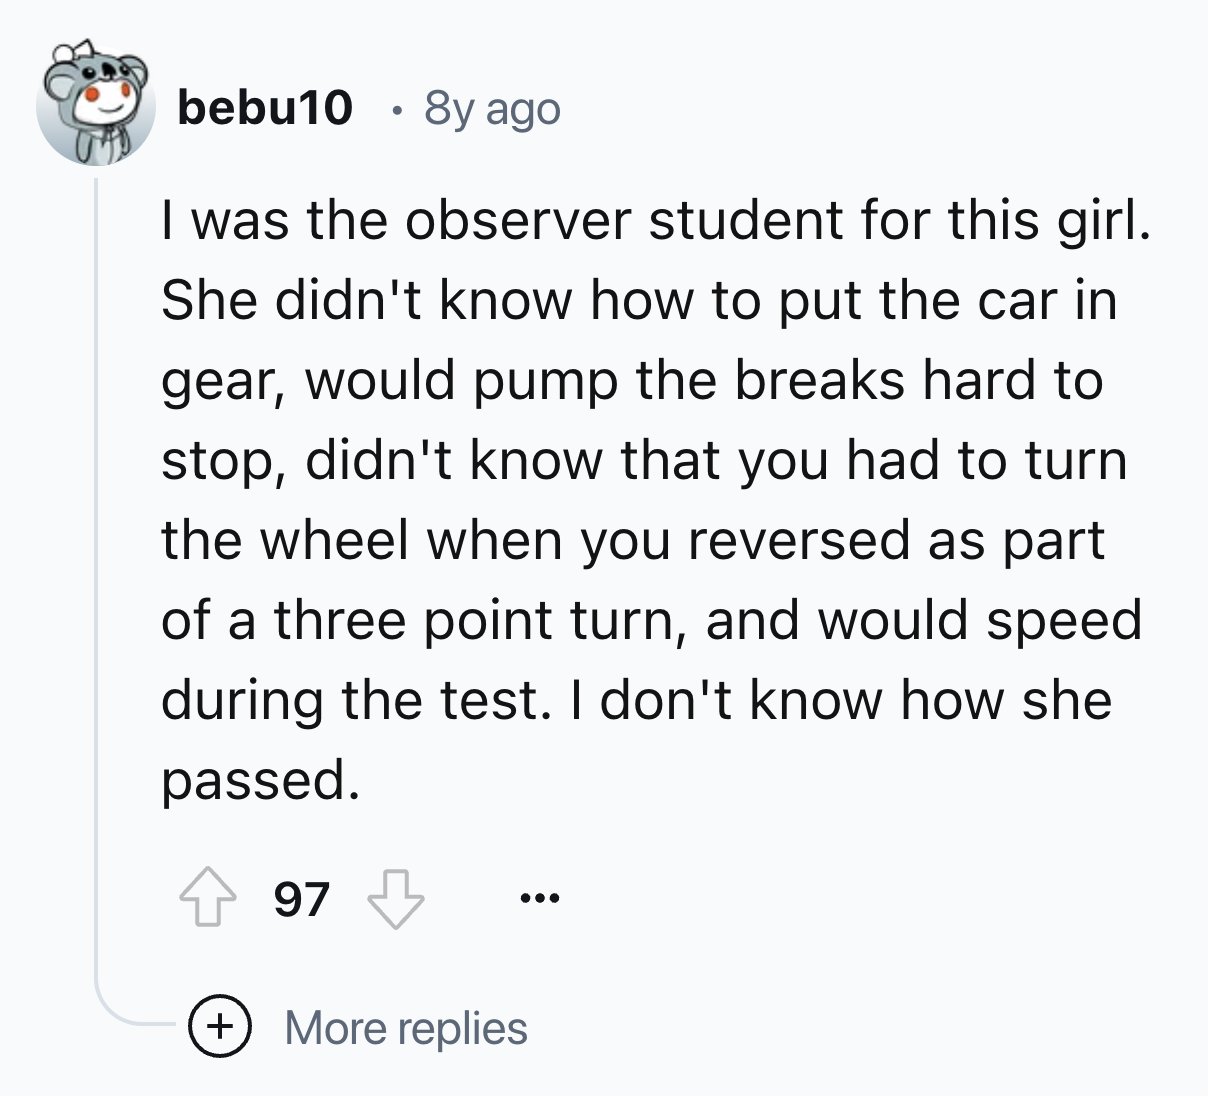 screenshot - bebu10 8y ago I was the observer student for this girl. She didn't know how to put the car in gear, would pump the breaks hard to stop, didn't know that you had to turn the wheel when you reversed as part of a three point turn, and would spee